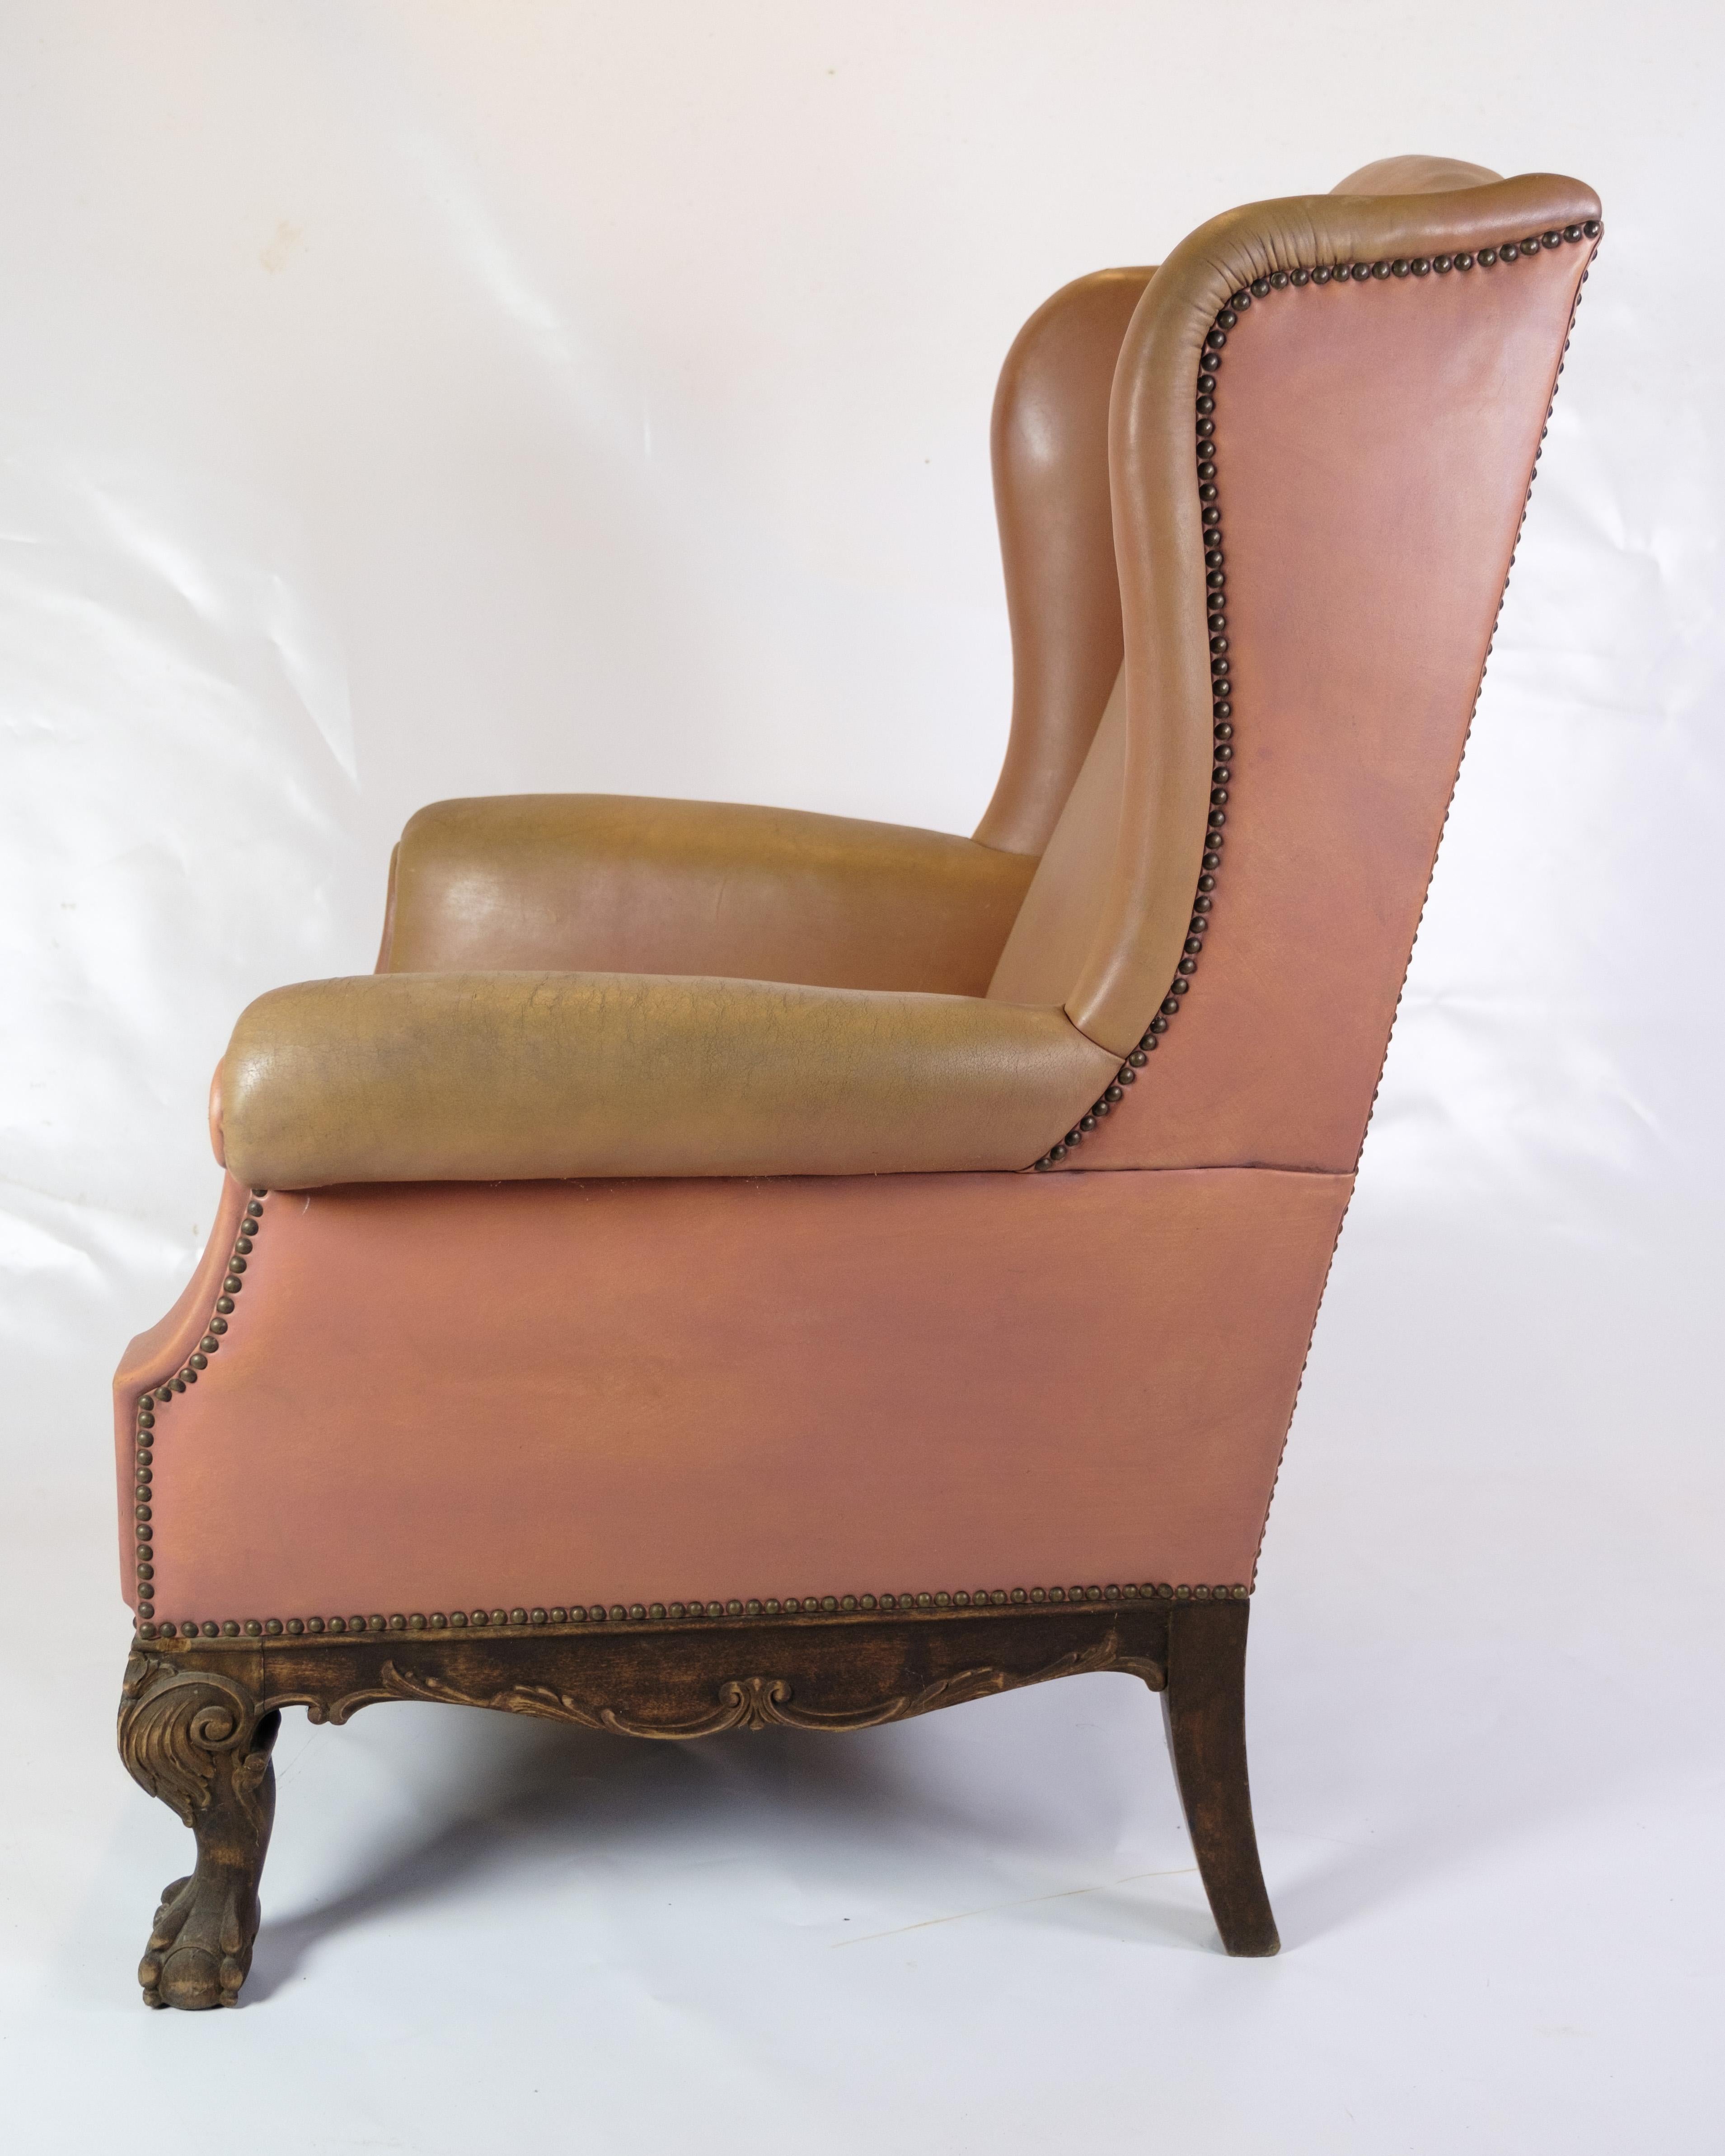 This antique Chesterfield-style high flap chair is a masterpiece of furniture art from the 1920s. Upholstered in brown studded leather, this chair exudes a timeless elegance and sophistication characteristic of Chesterfield design.

The most notable